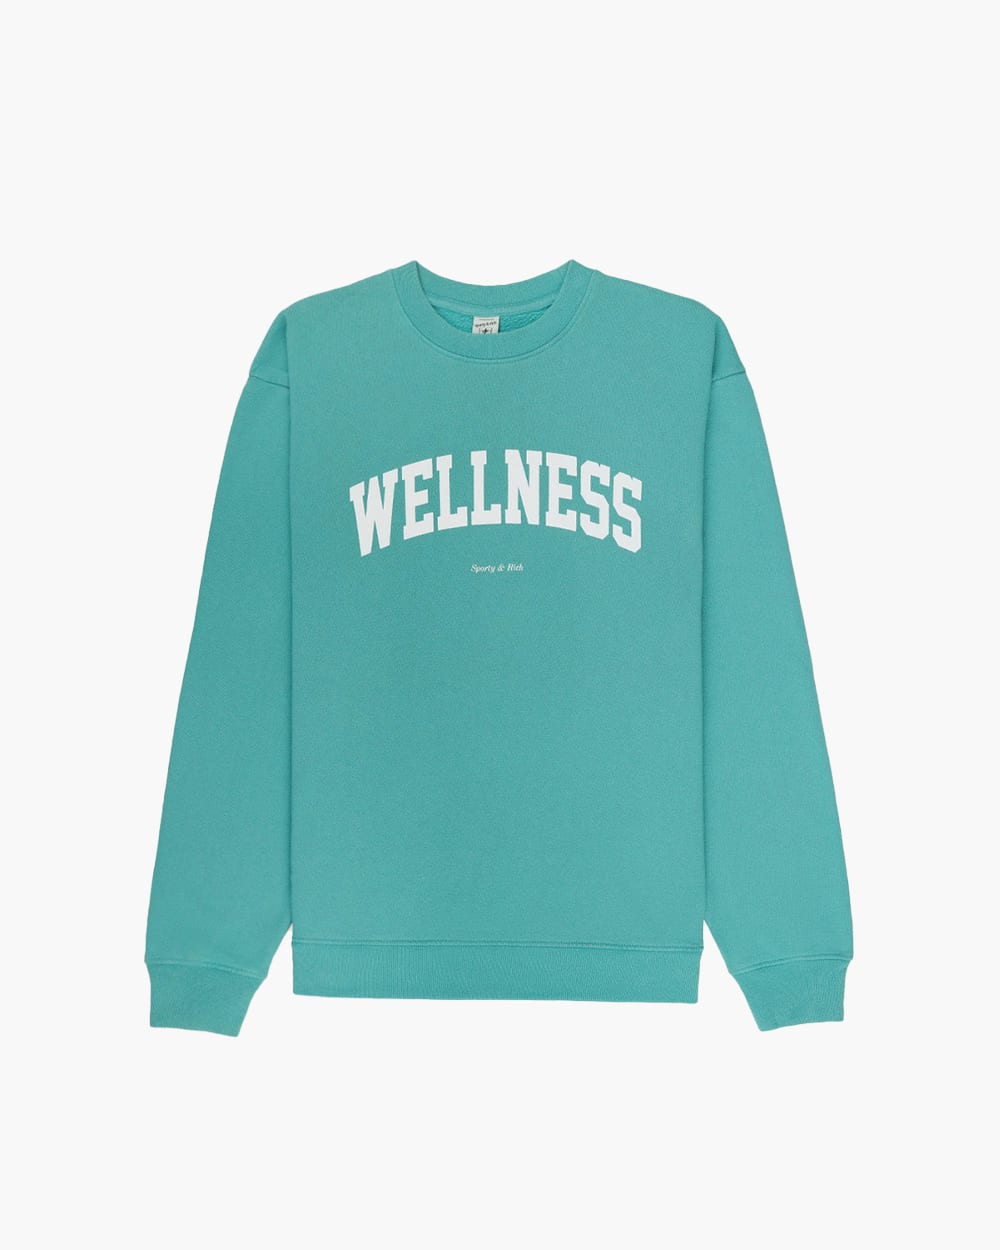 SPORTY AND RICH WELLNESS IVY CREWNECK